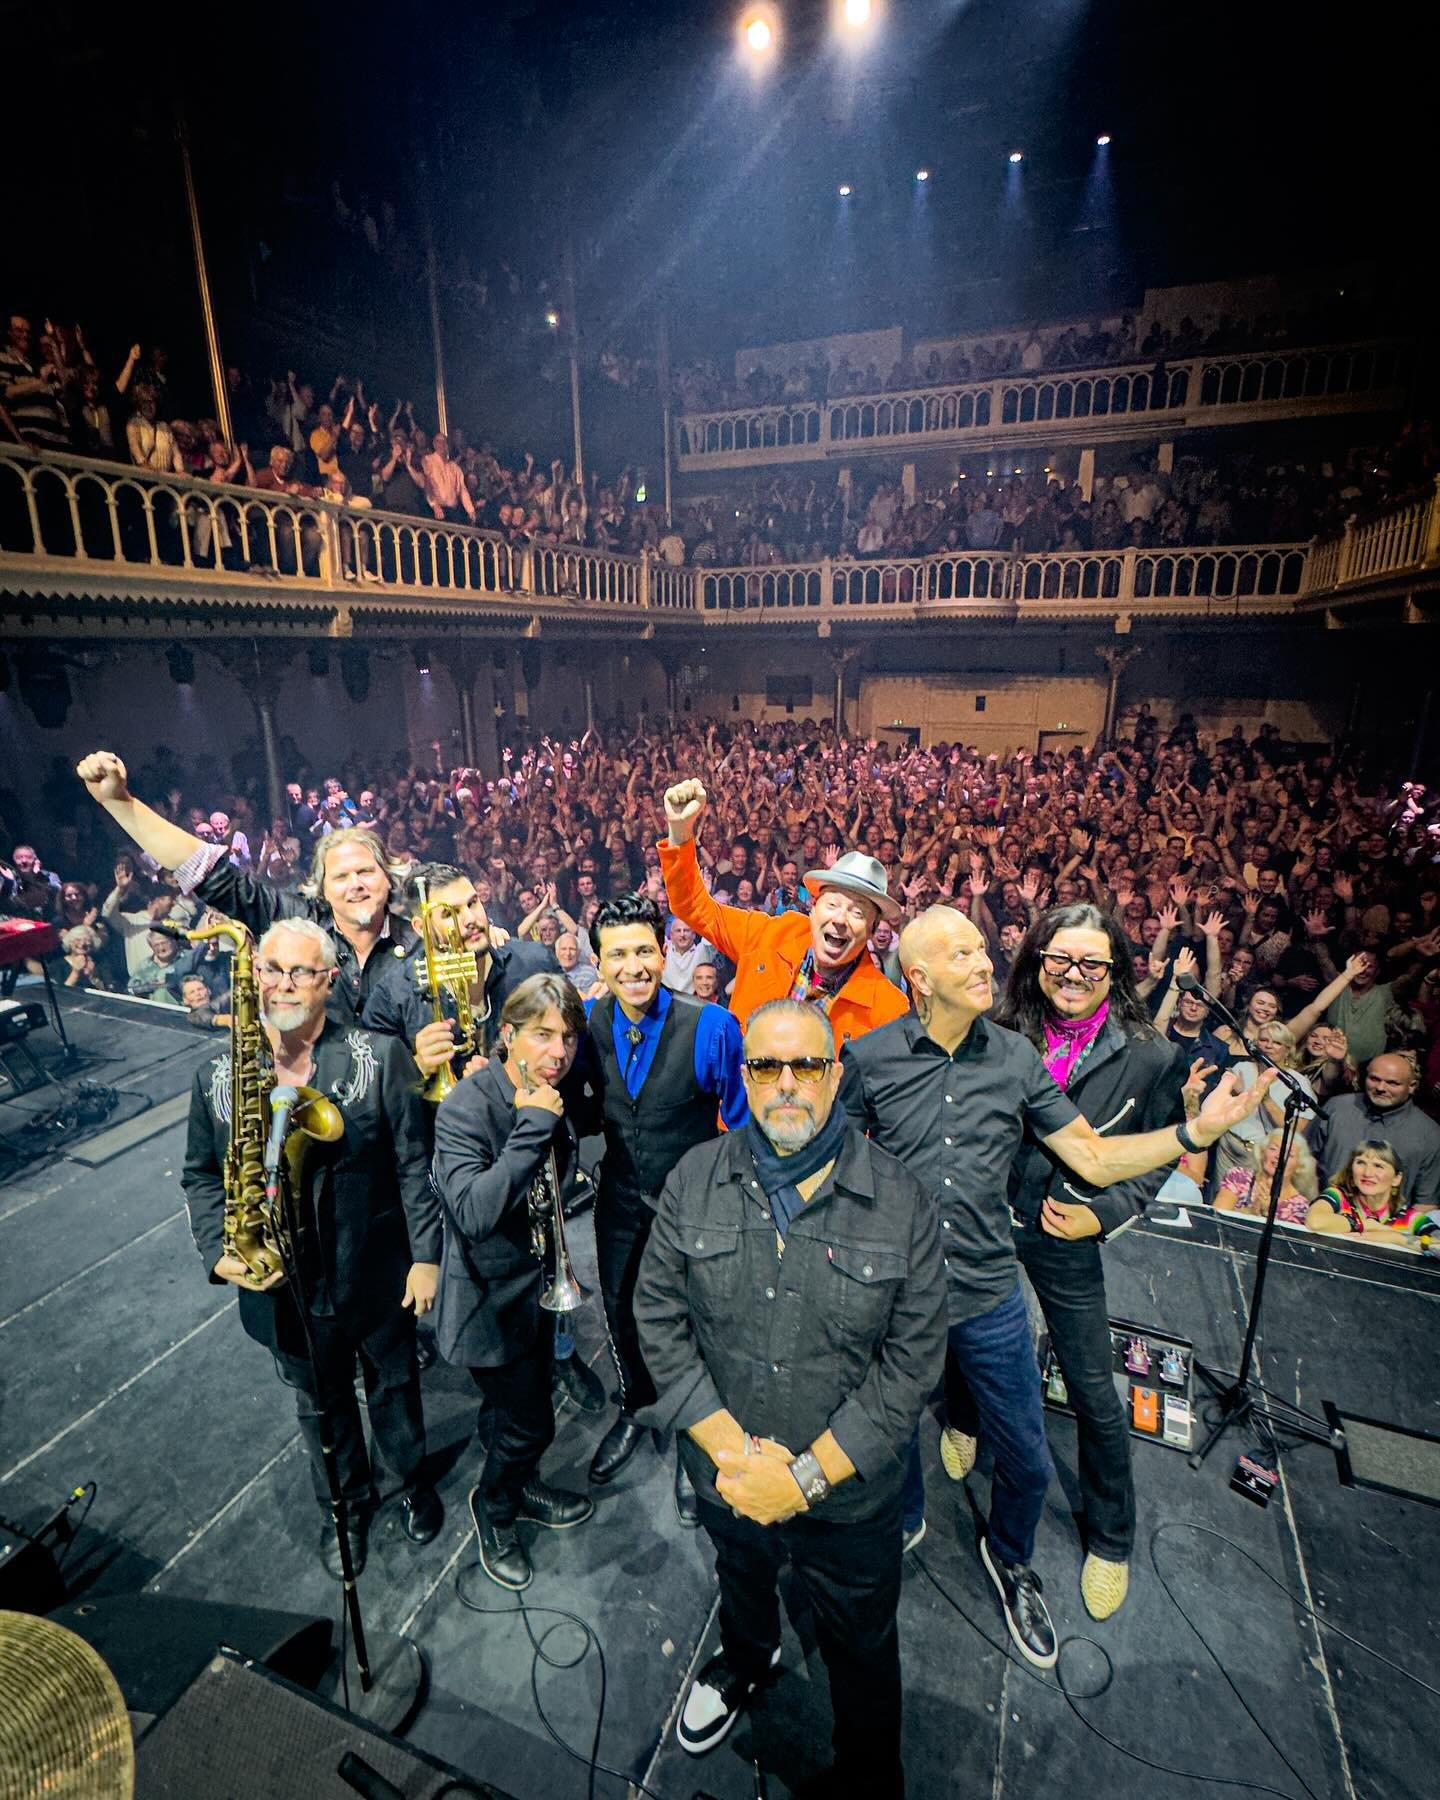 AMSTERDAM! 🌷 Amazing as always at the beautiful @paradisoadam! Thanks for a Tuesday night sell out, we&rsquo;ll see you next time! 

📸 @michaelalanreynolds #TheMavericks #WorldTour24 #Amsterdam